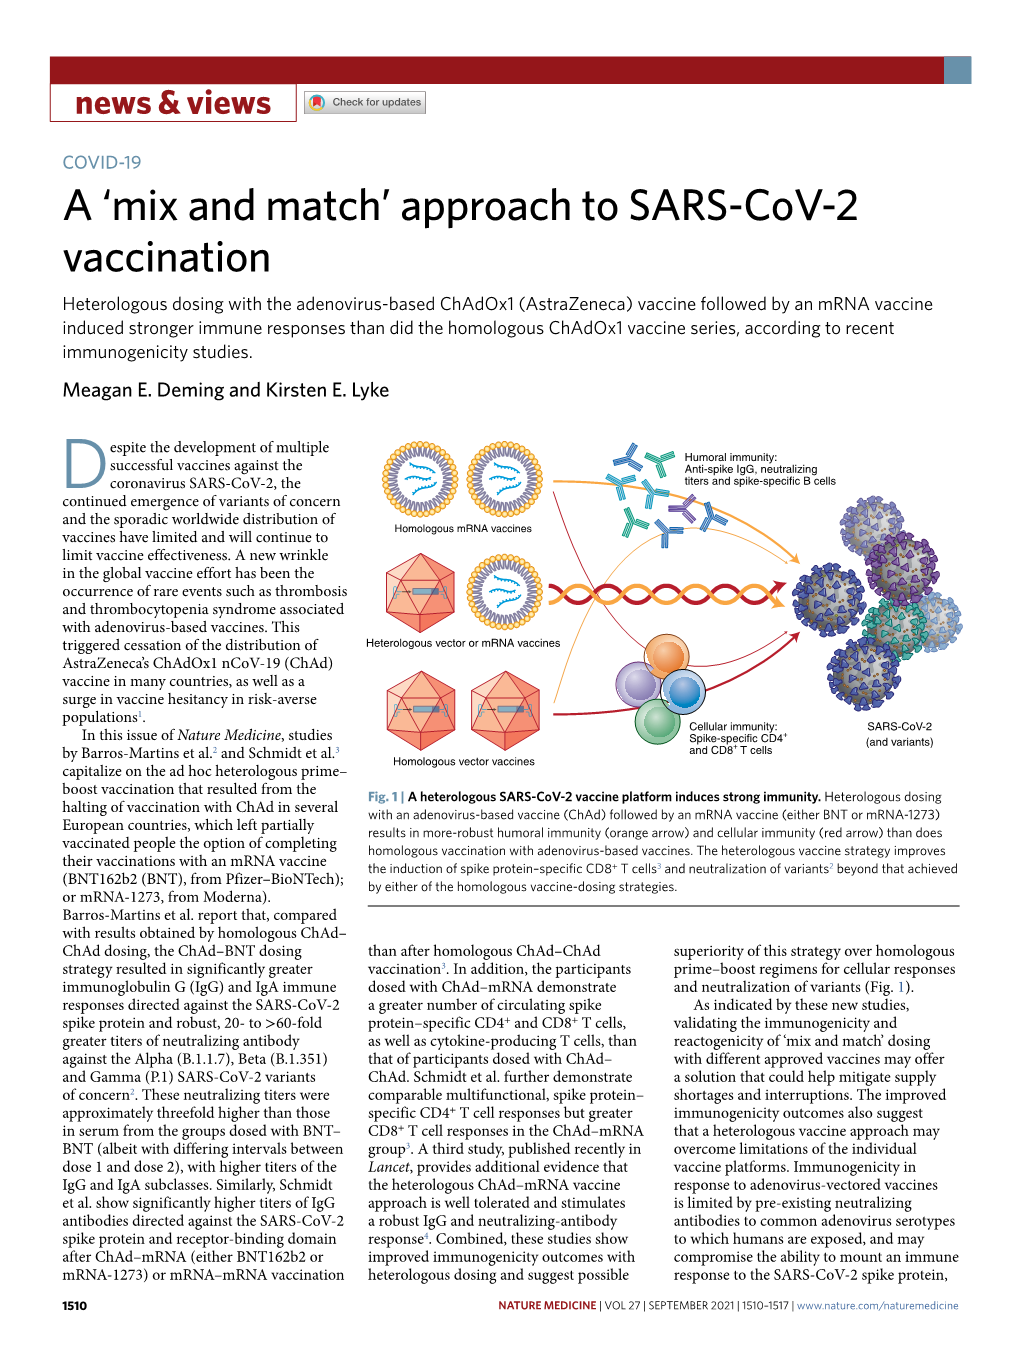 Approach to SARS-Cov-2 Vaccination